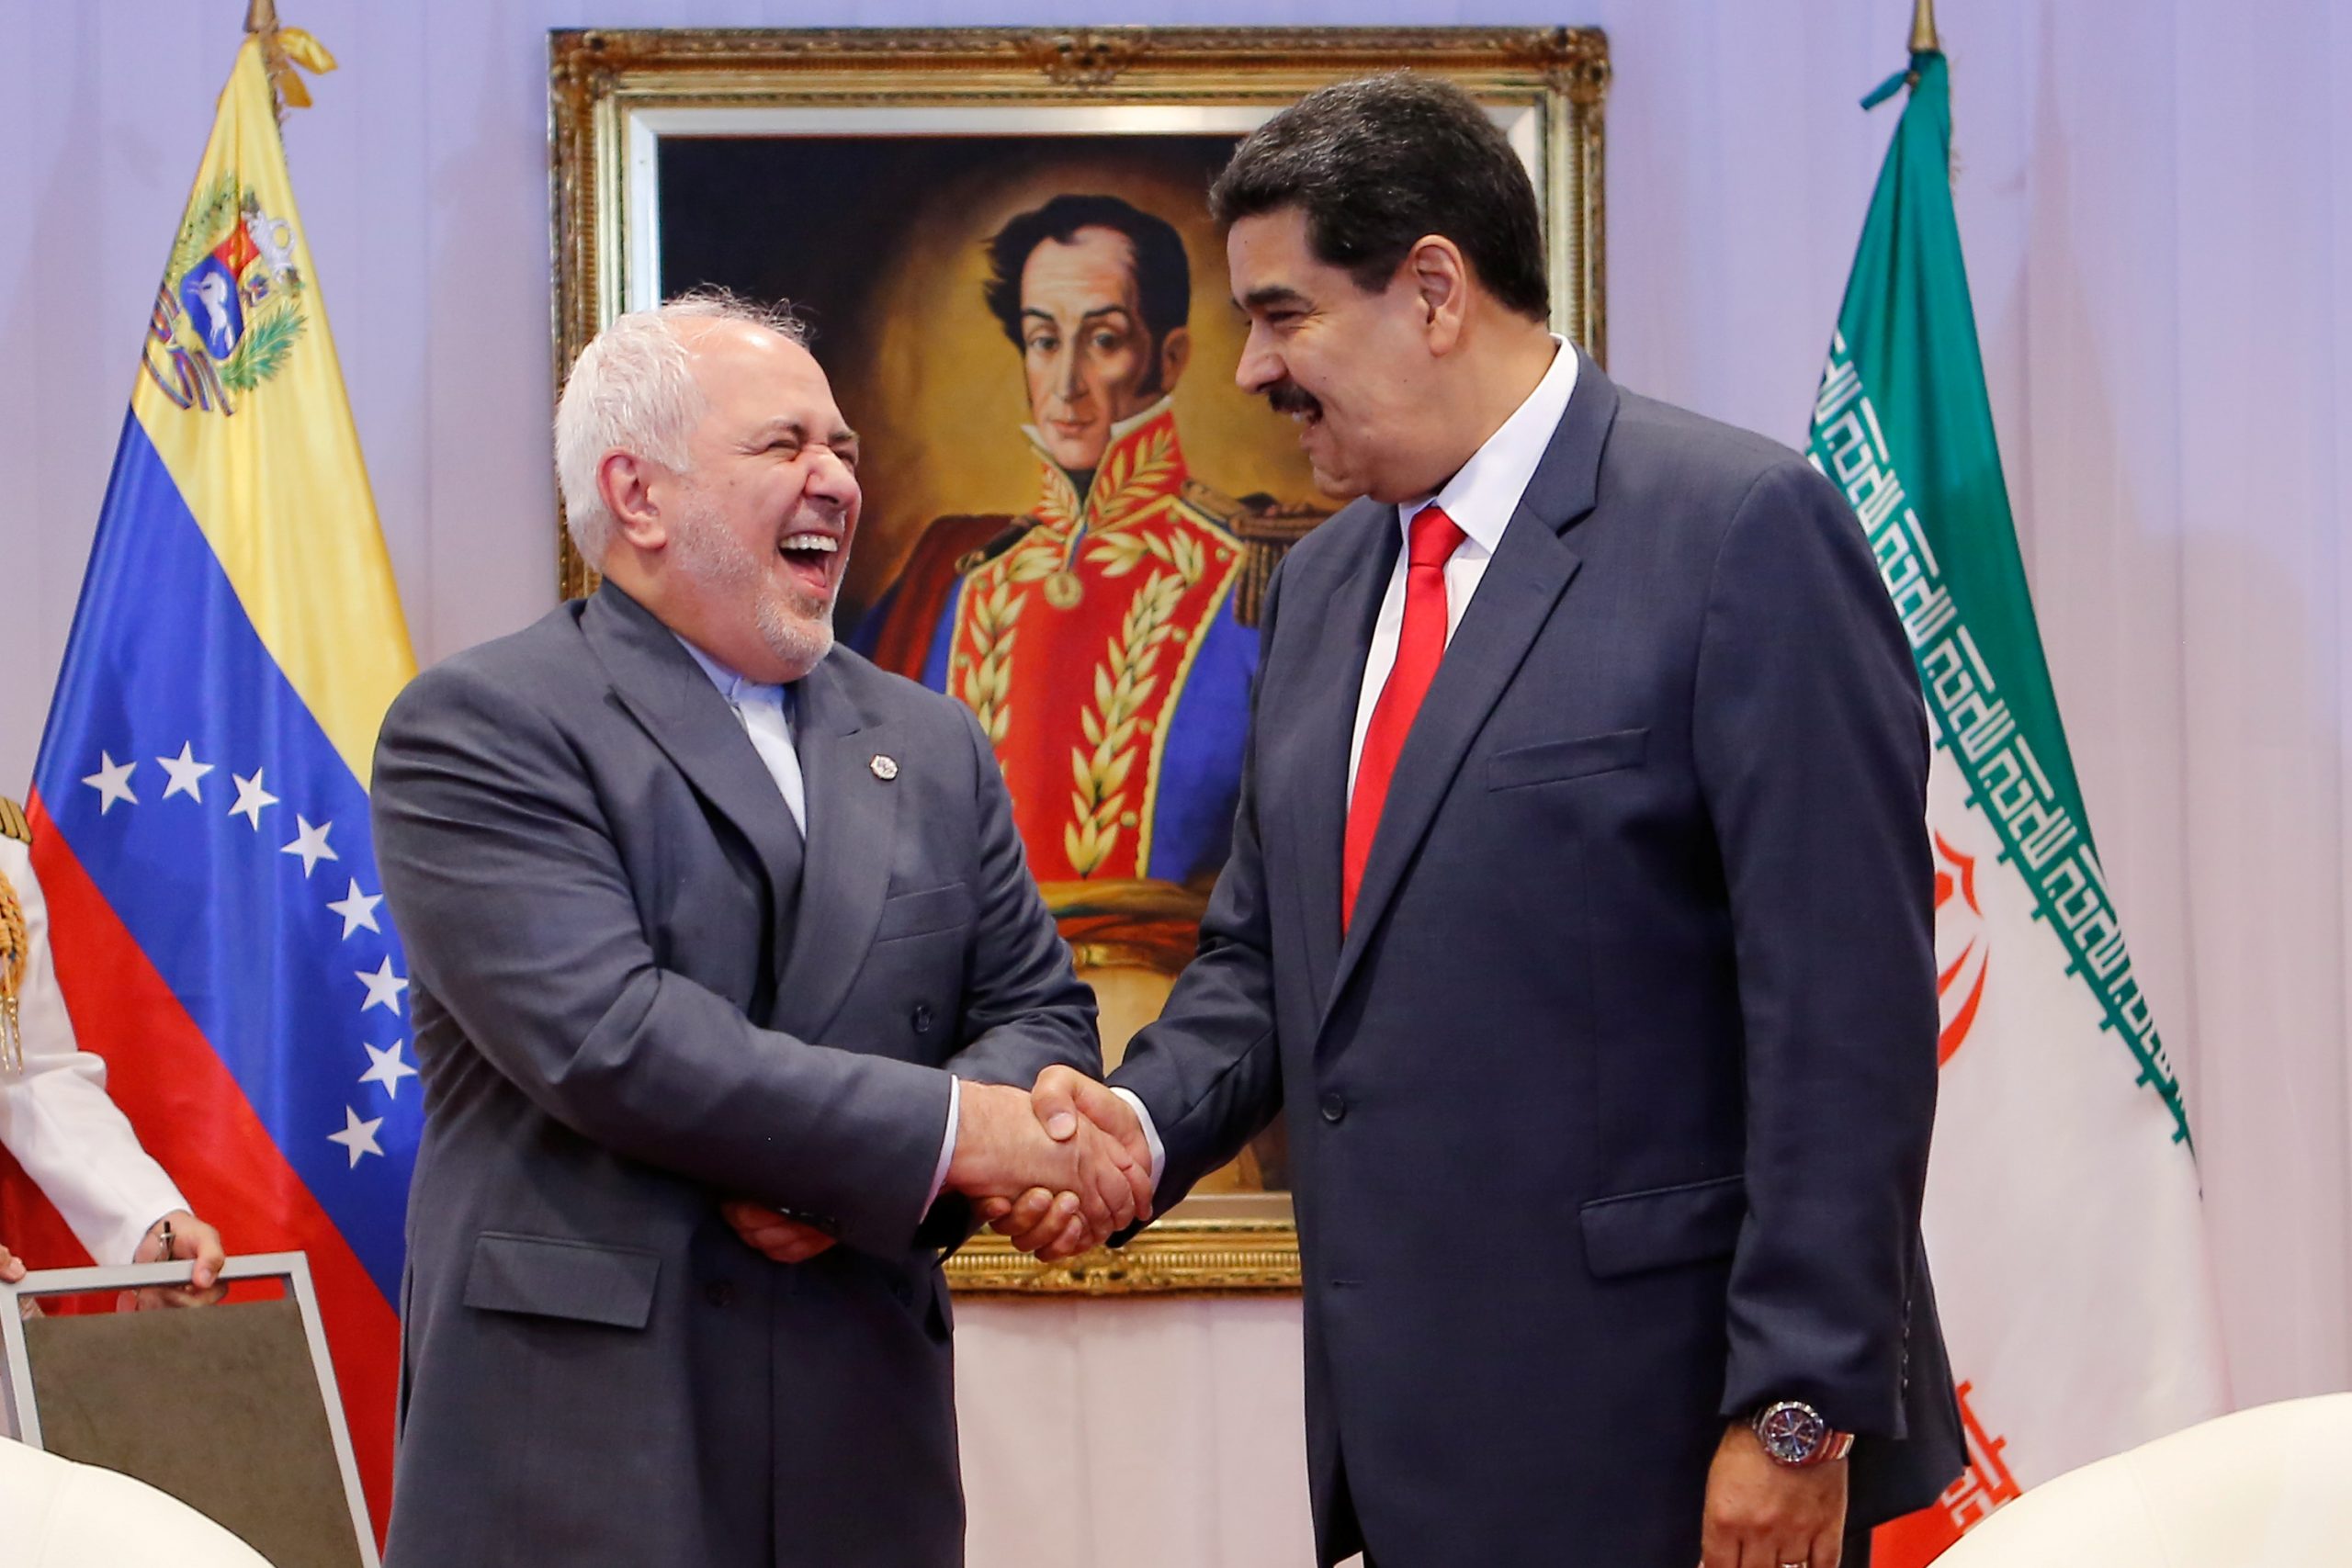 Trump fights Iran's 'Axis of Resistance' in Latin America - Atlantic Council